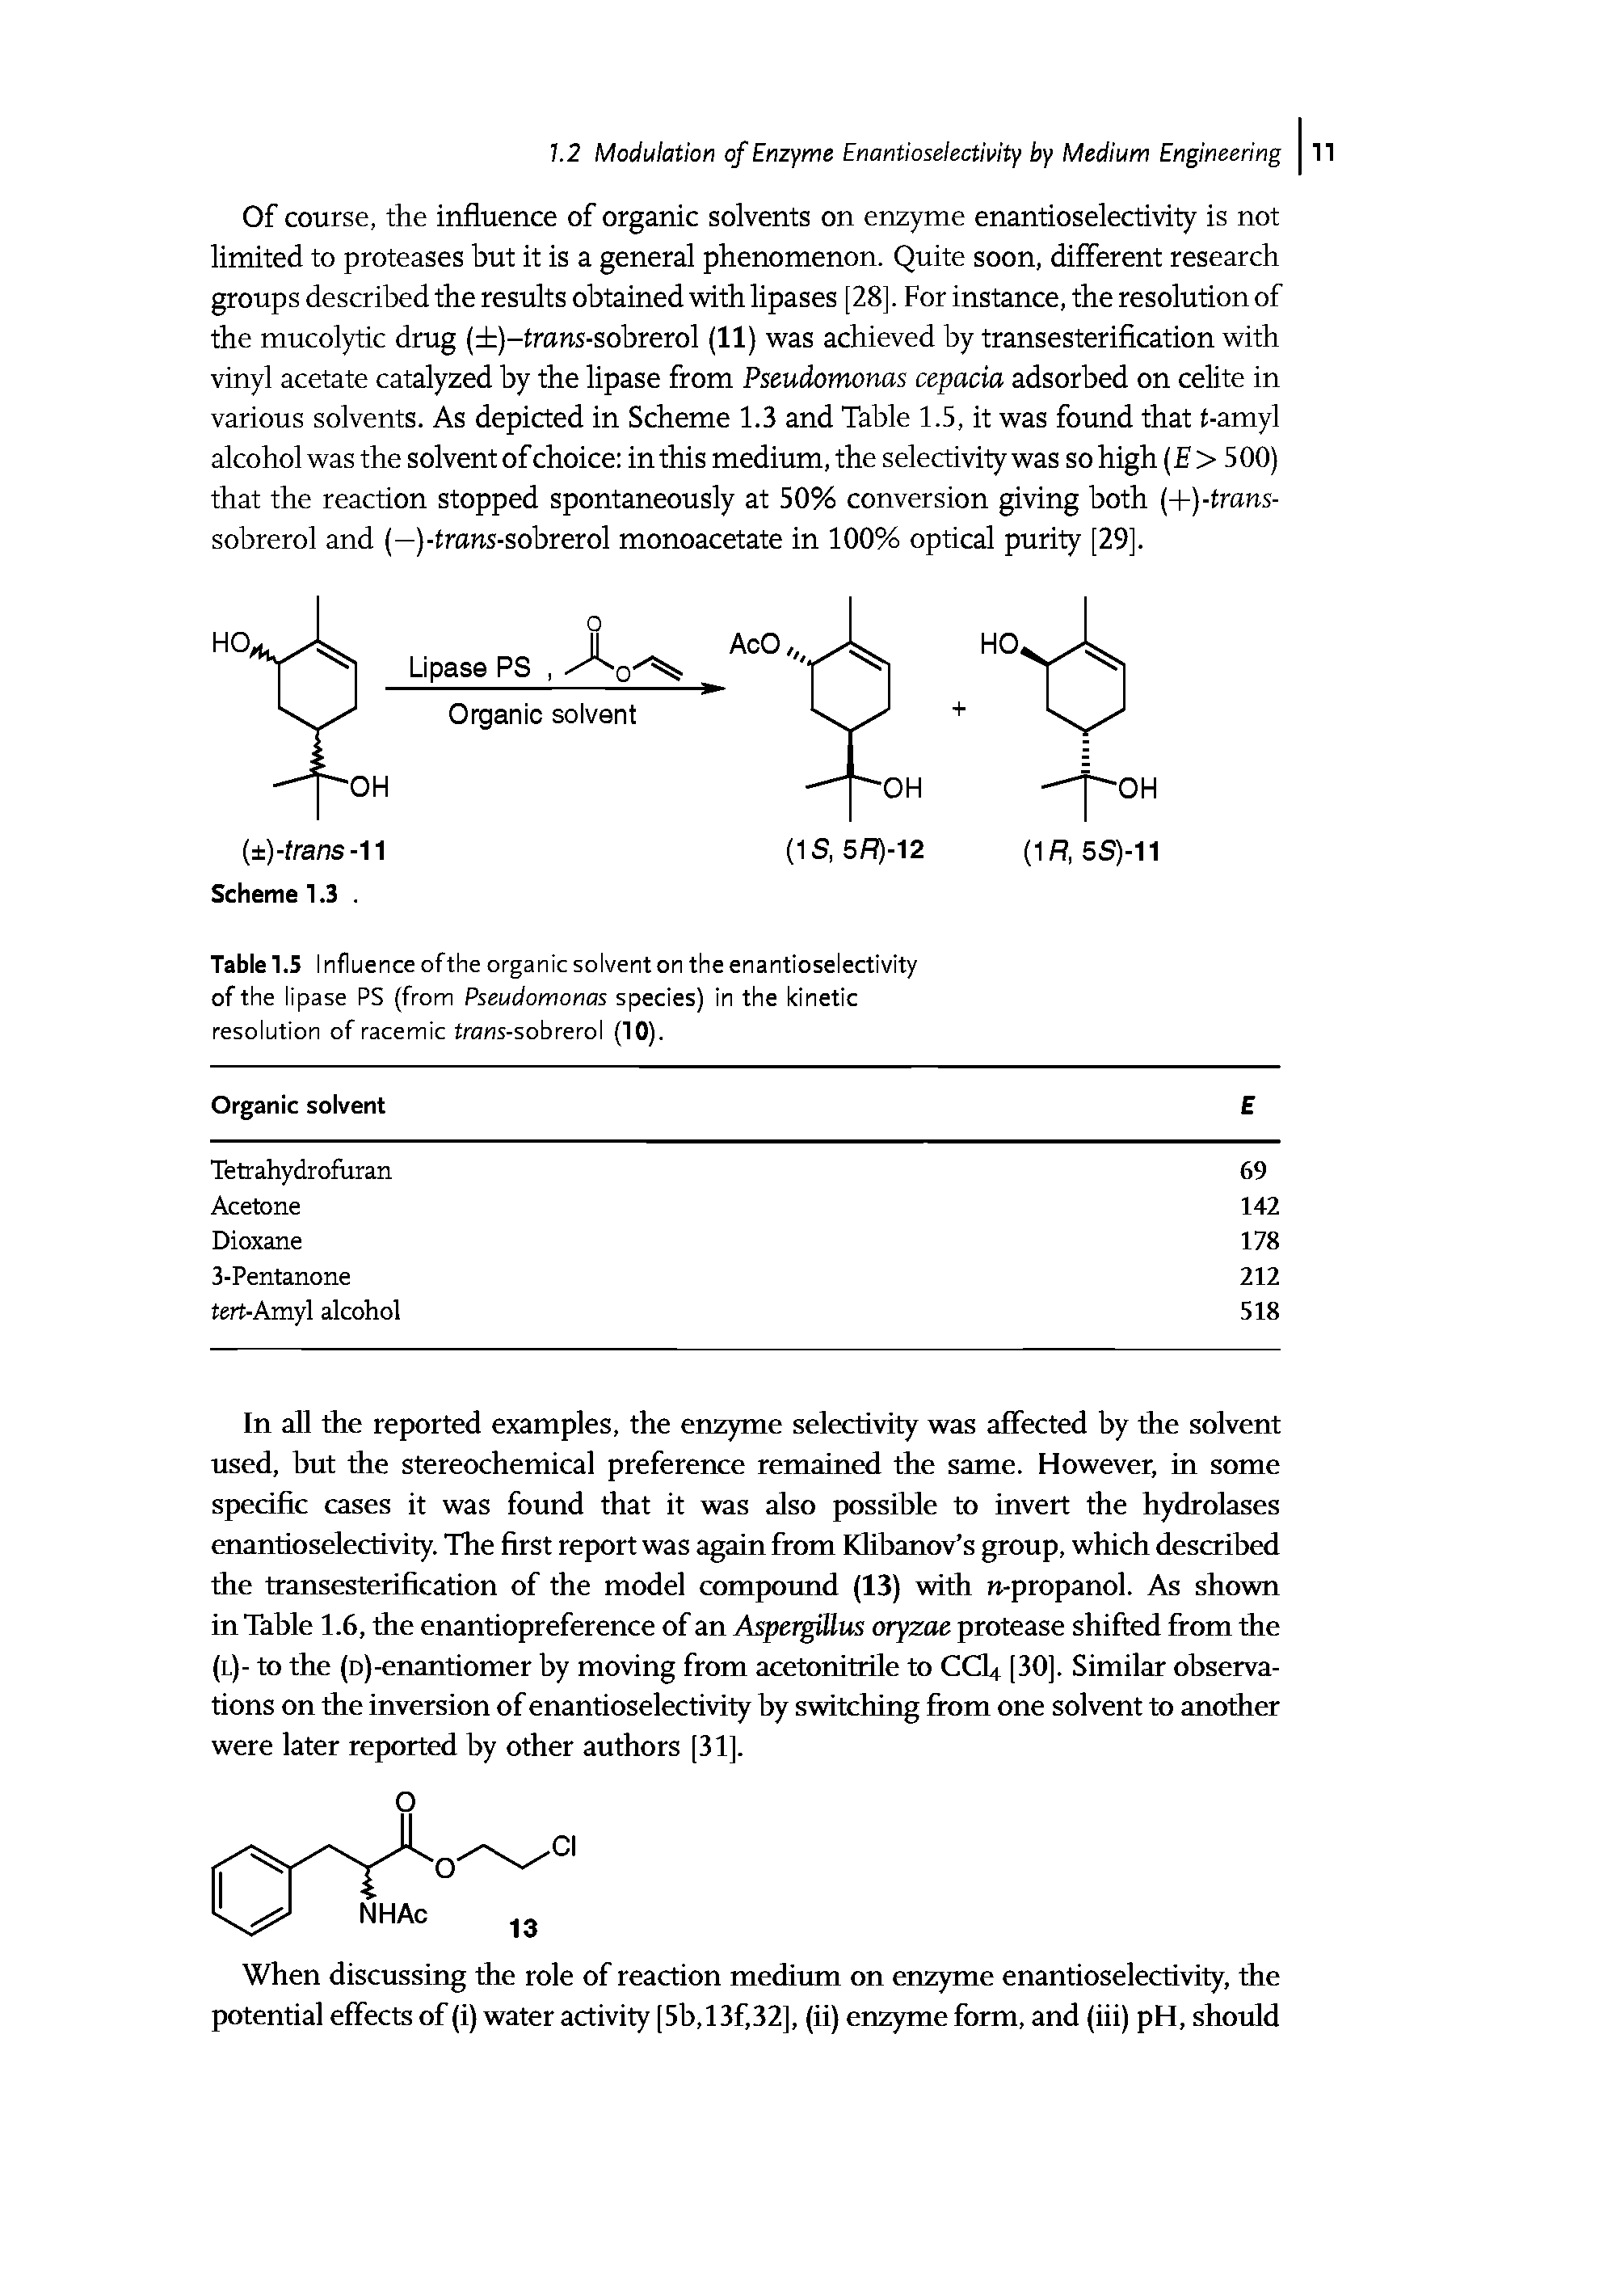 Table 1.5 I nfluence ofthe organic solvent on the enantioselectivity of the lipase PS (from Pseudomonas species) in the kinetic resolution of racemic trans-sobrerol (10).